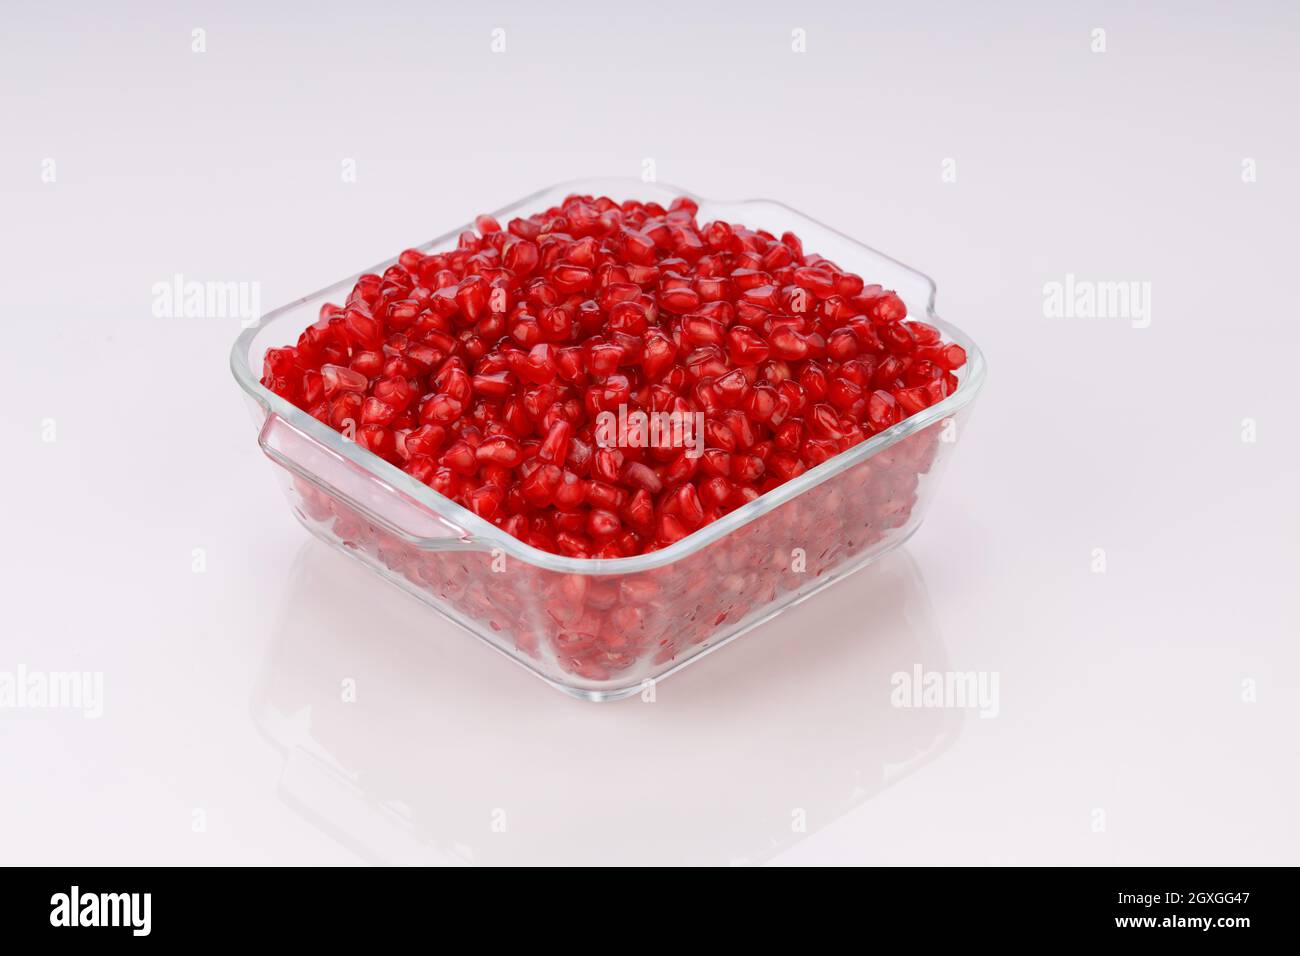 Fresh Pomegranate seed arranged in a square glass container with white background, isolated. Stock Photo